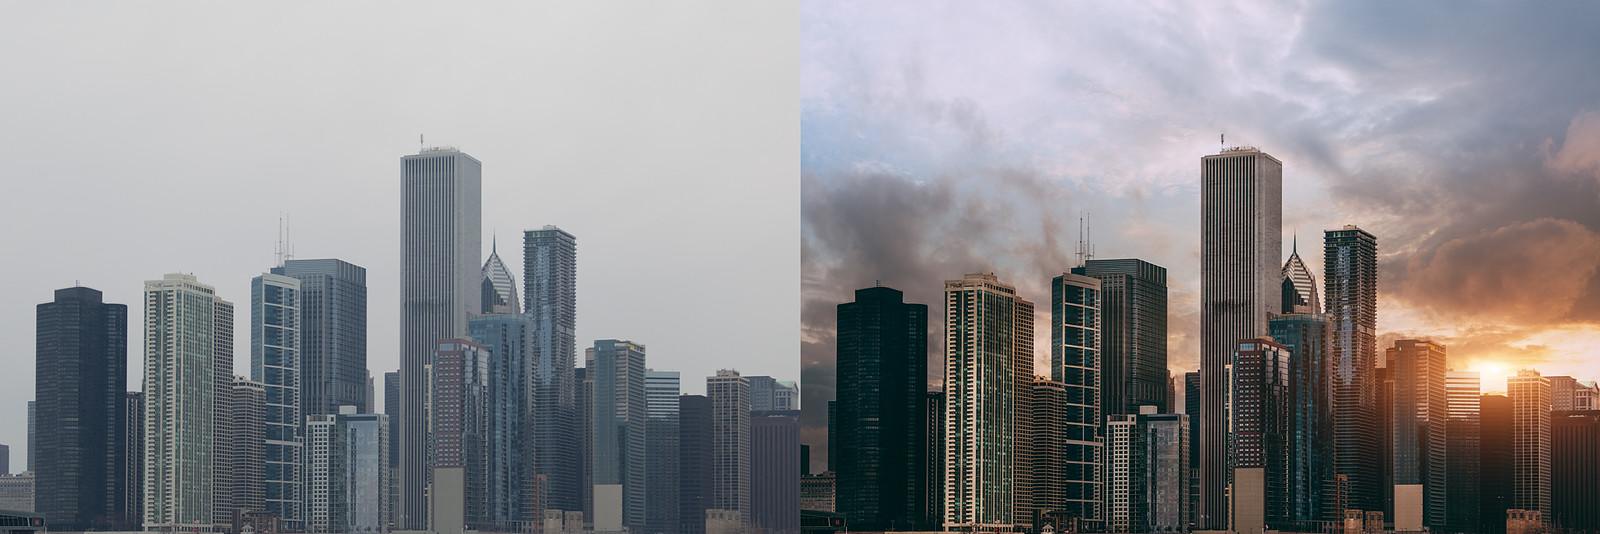 before-after-chicago-X3